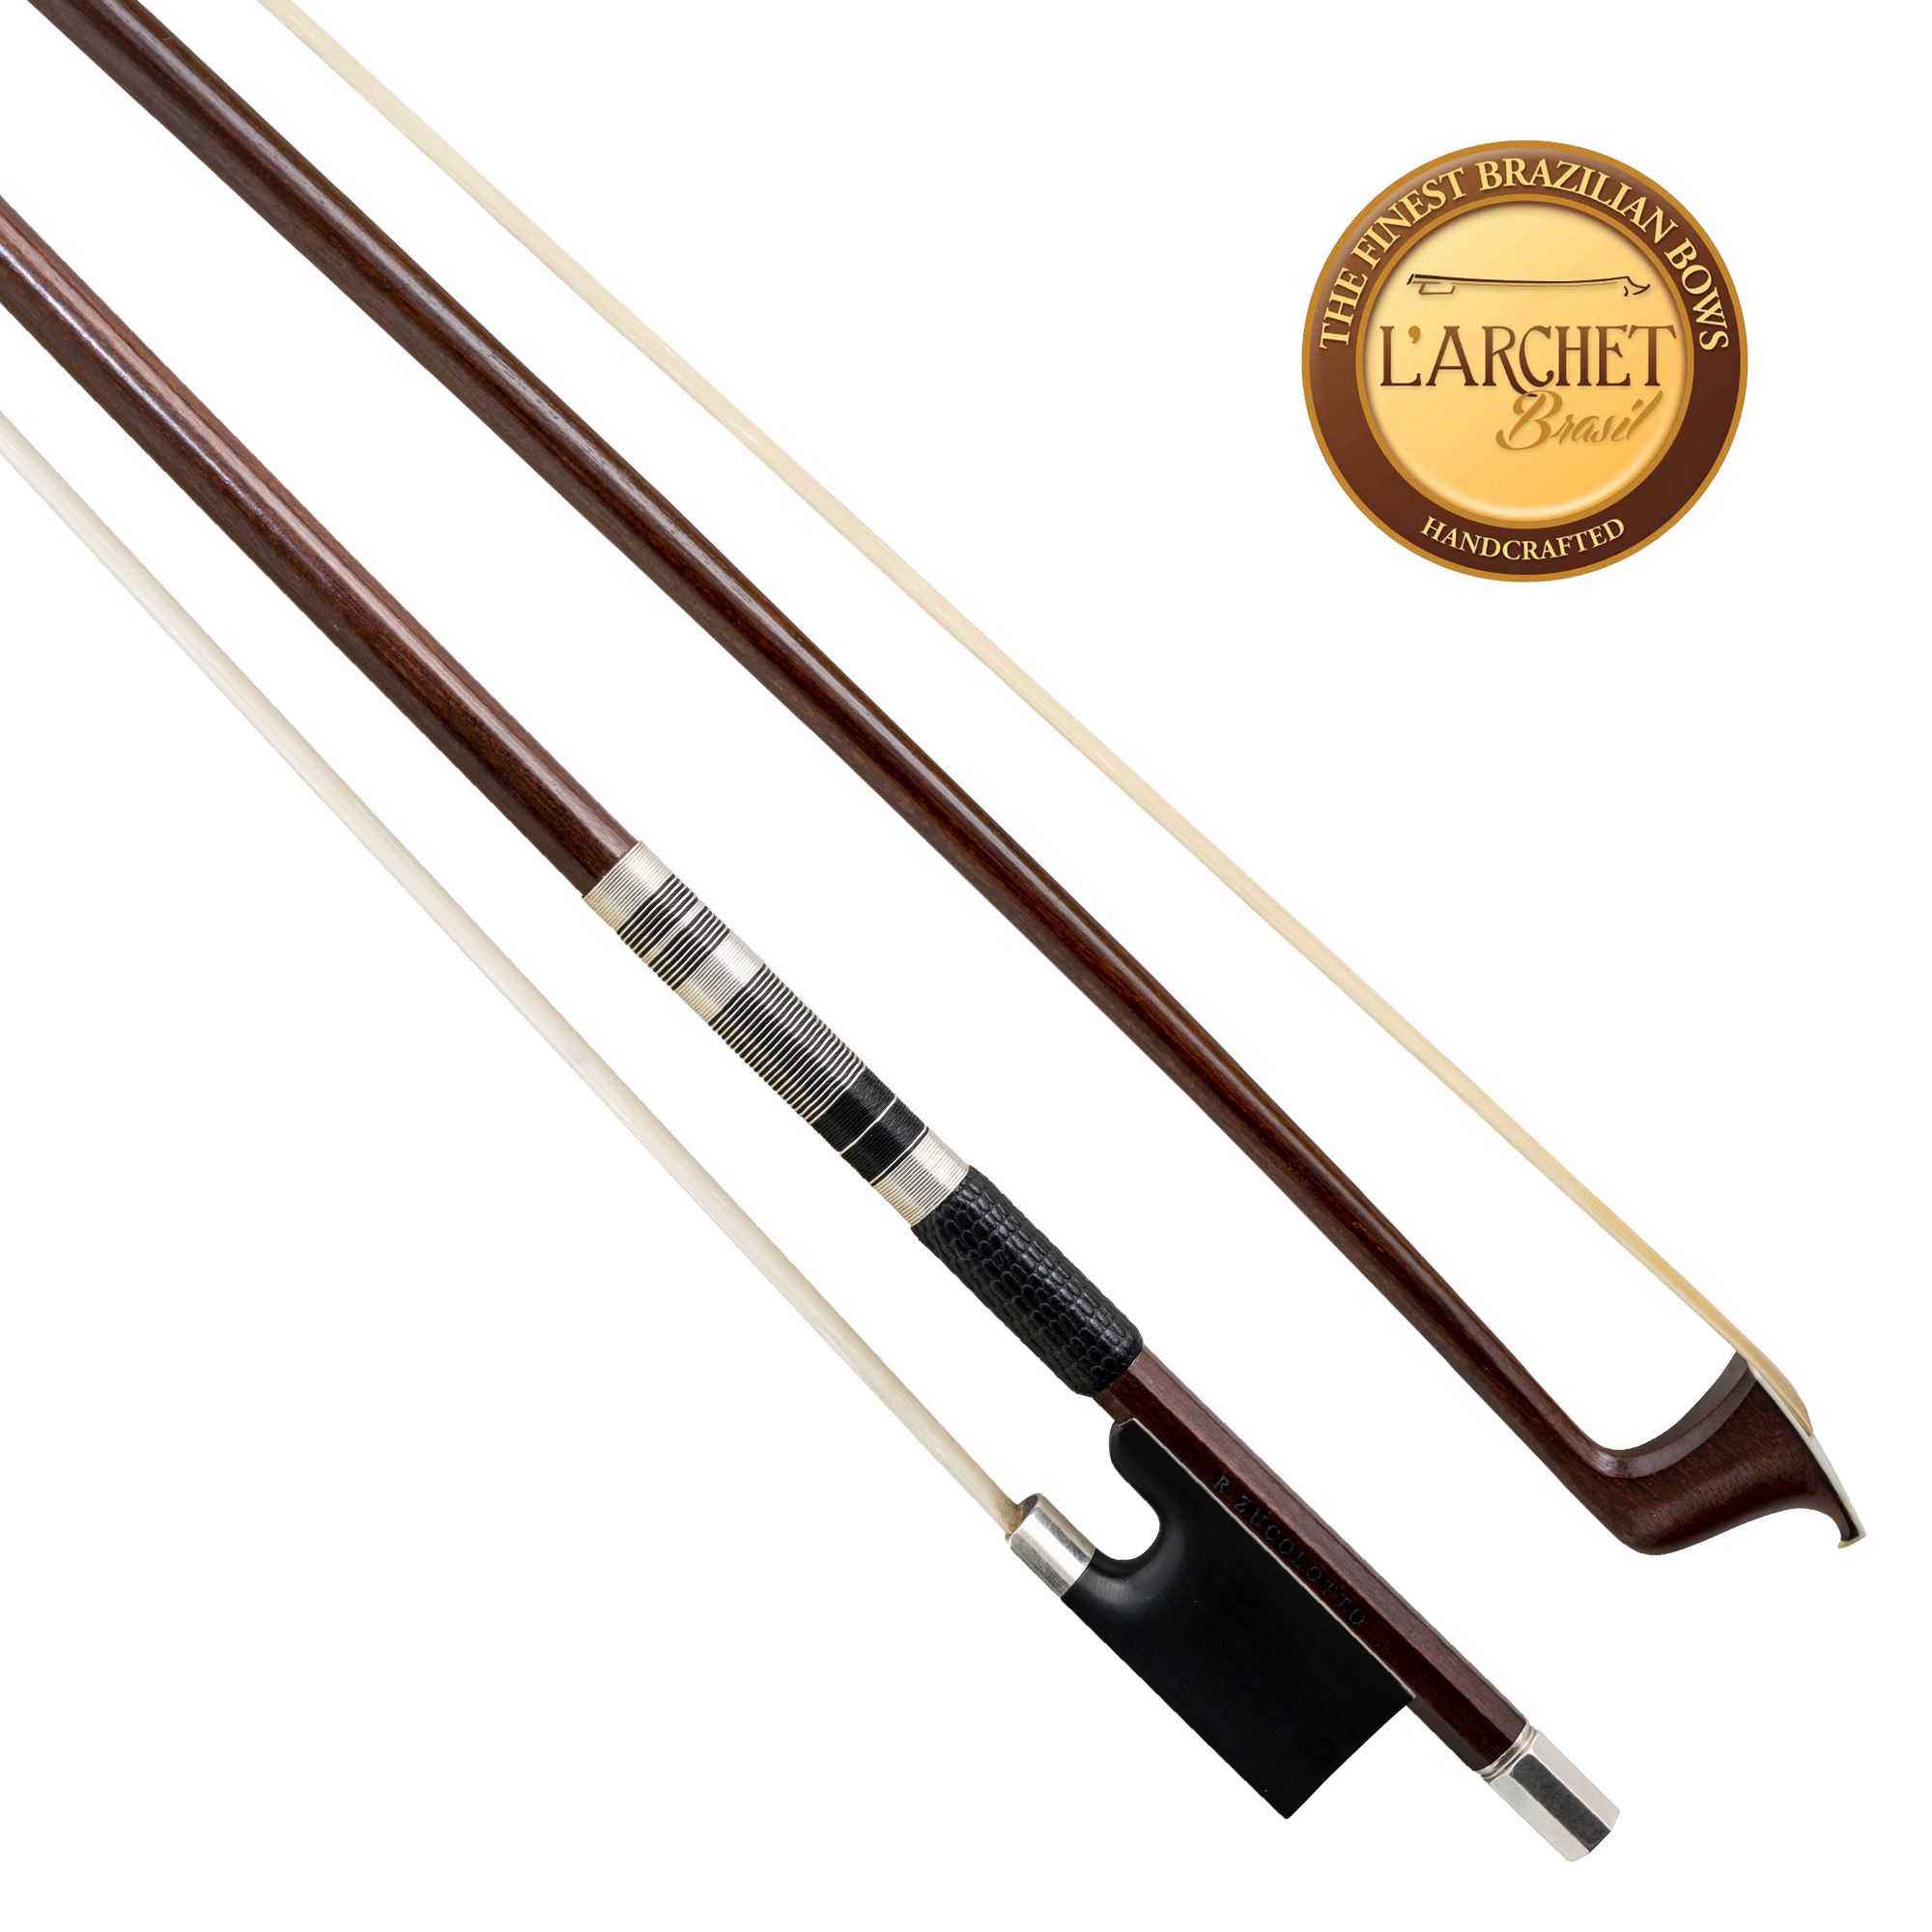 L'archet Brasil Dodd-Style Silver Mounted Violin Bow in action